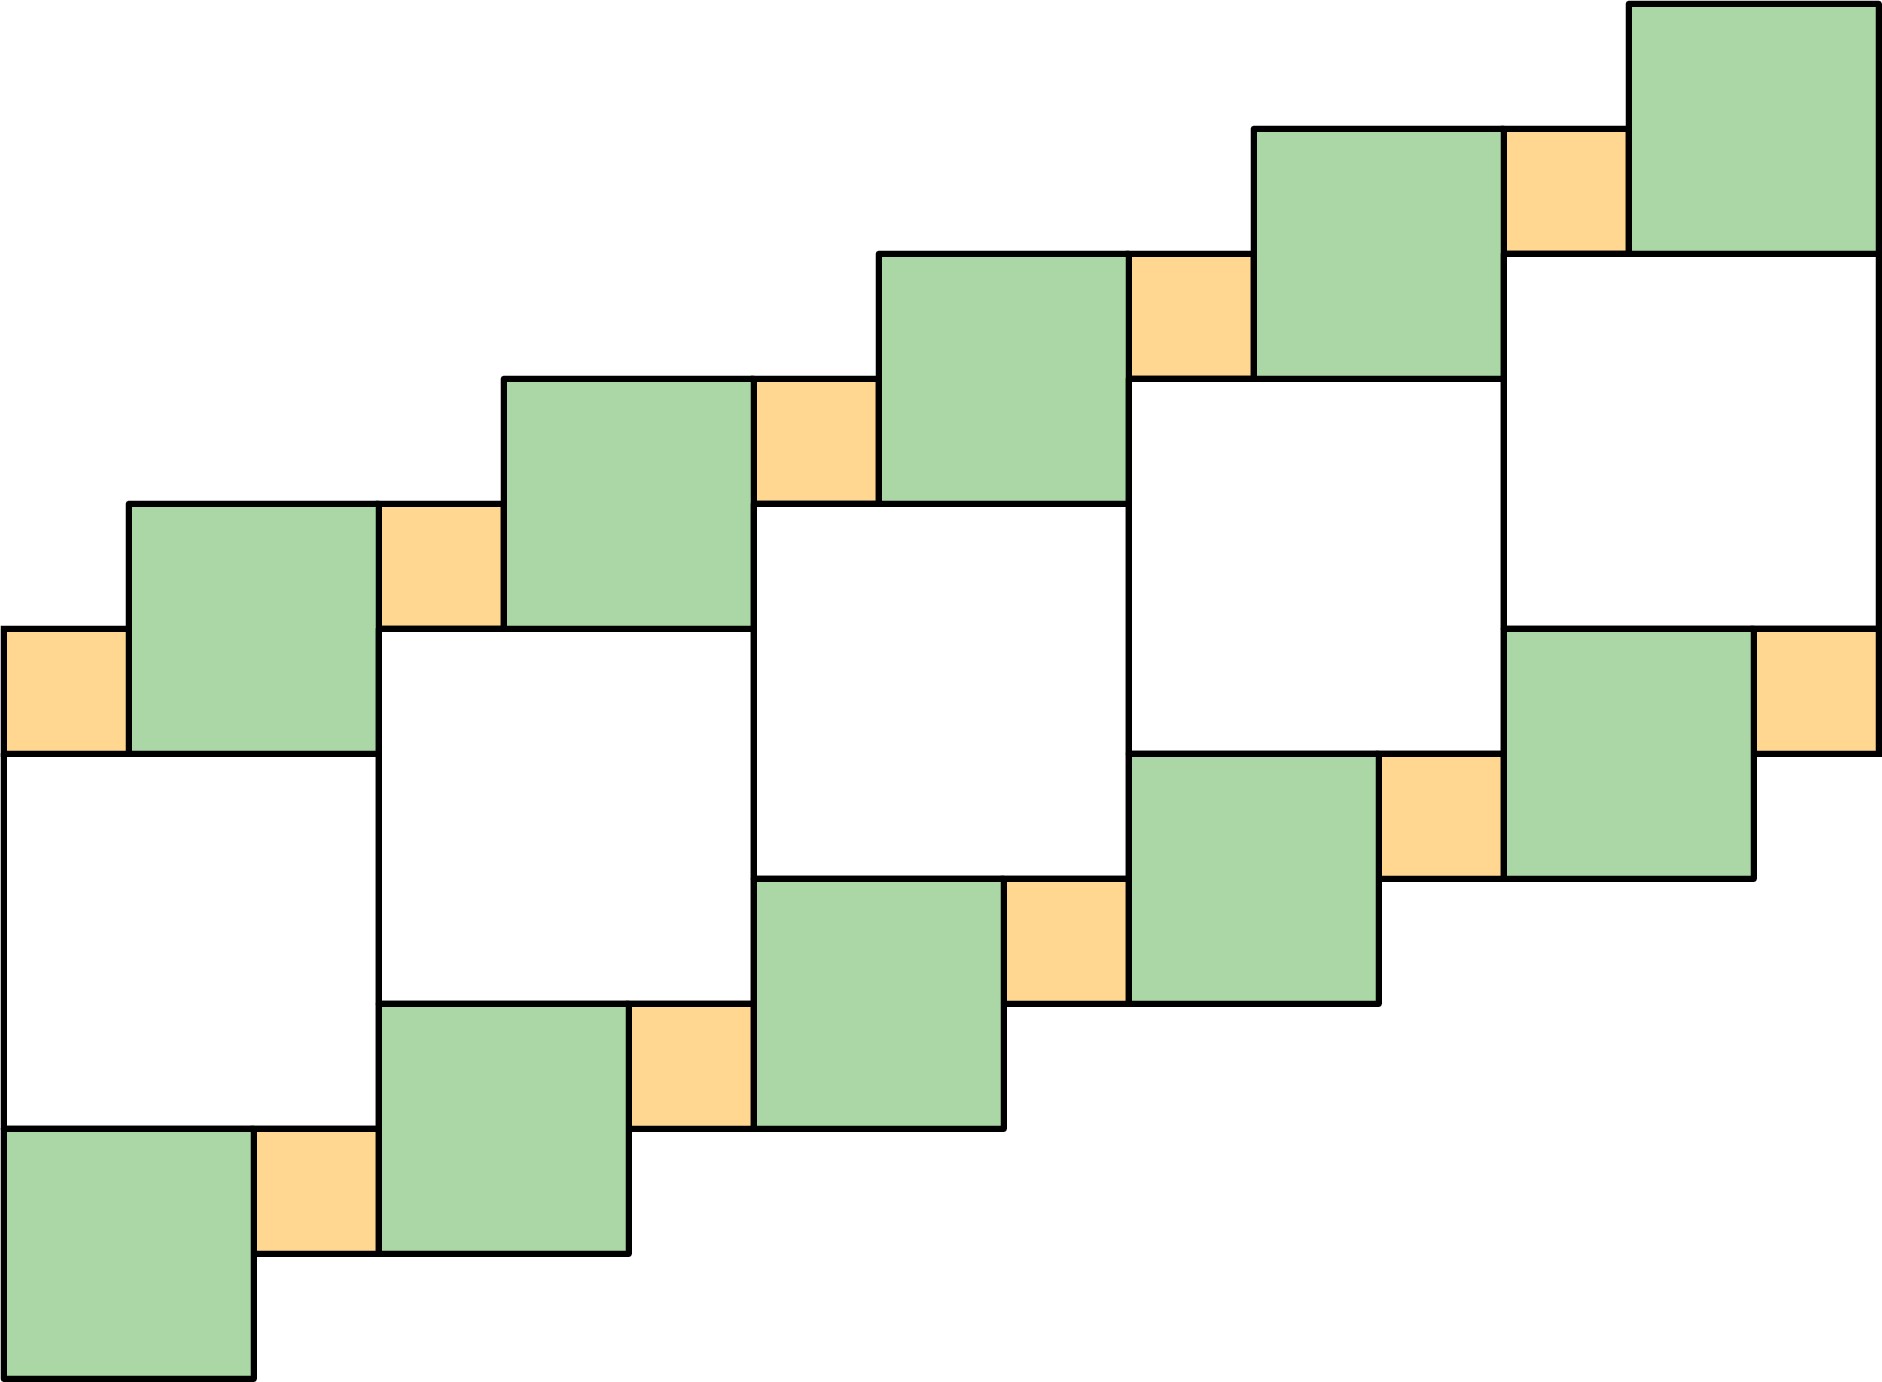 A plane composed of a series of squares. There are 5 large squares, 10 medium squares, and 10 small squares.